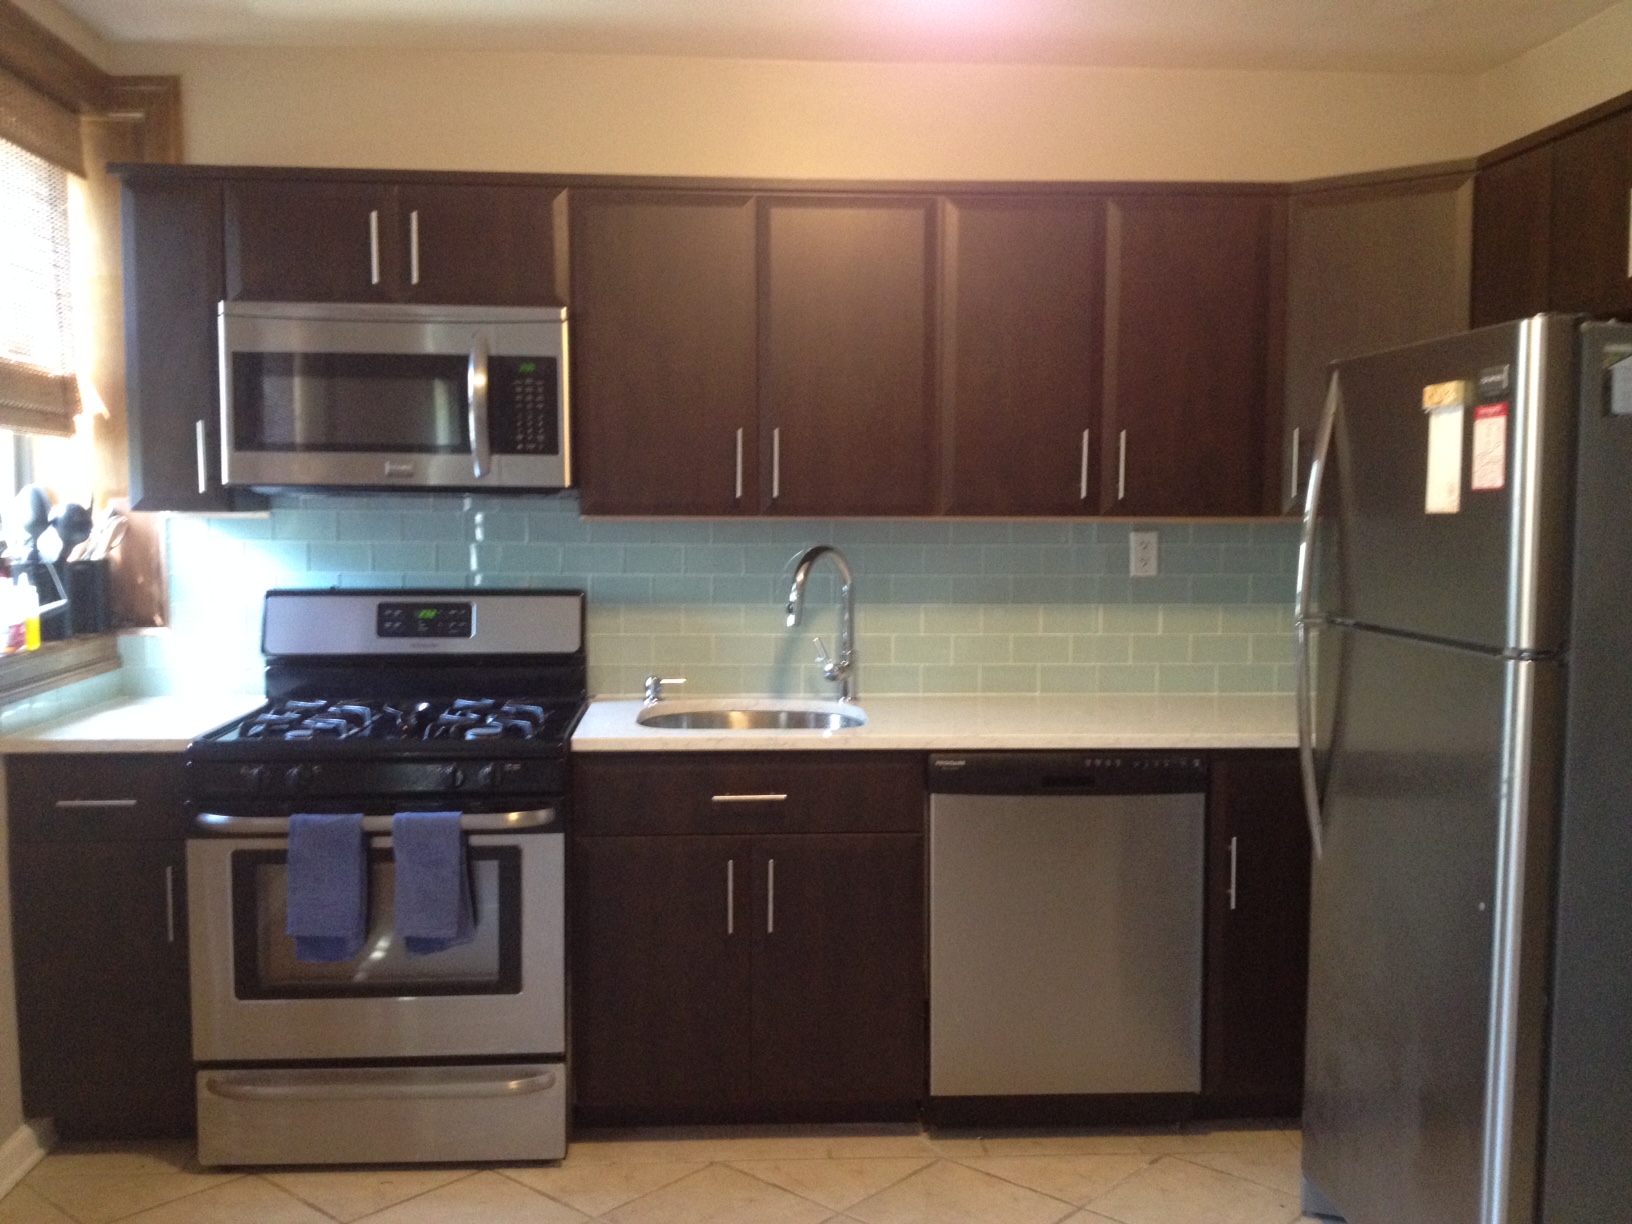 Kitchen Renovation Project Testimonials from Our Customers | Home Art Tile Kitchen and Bath